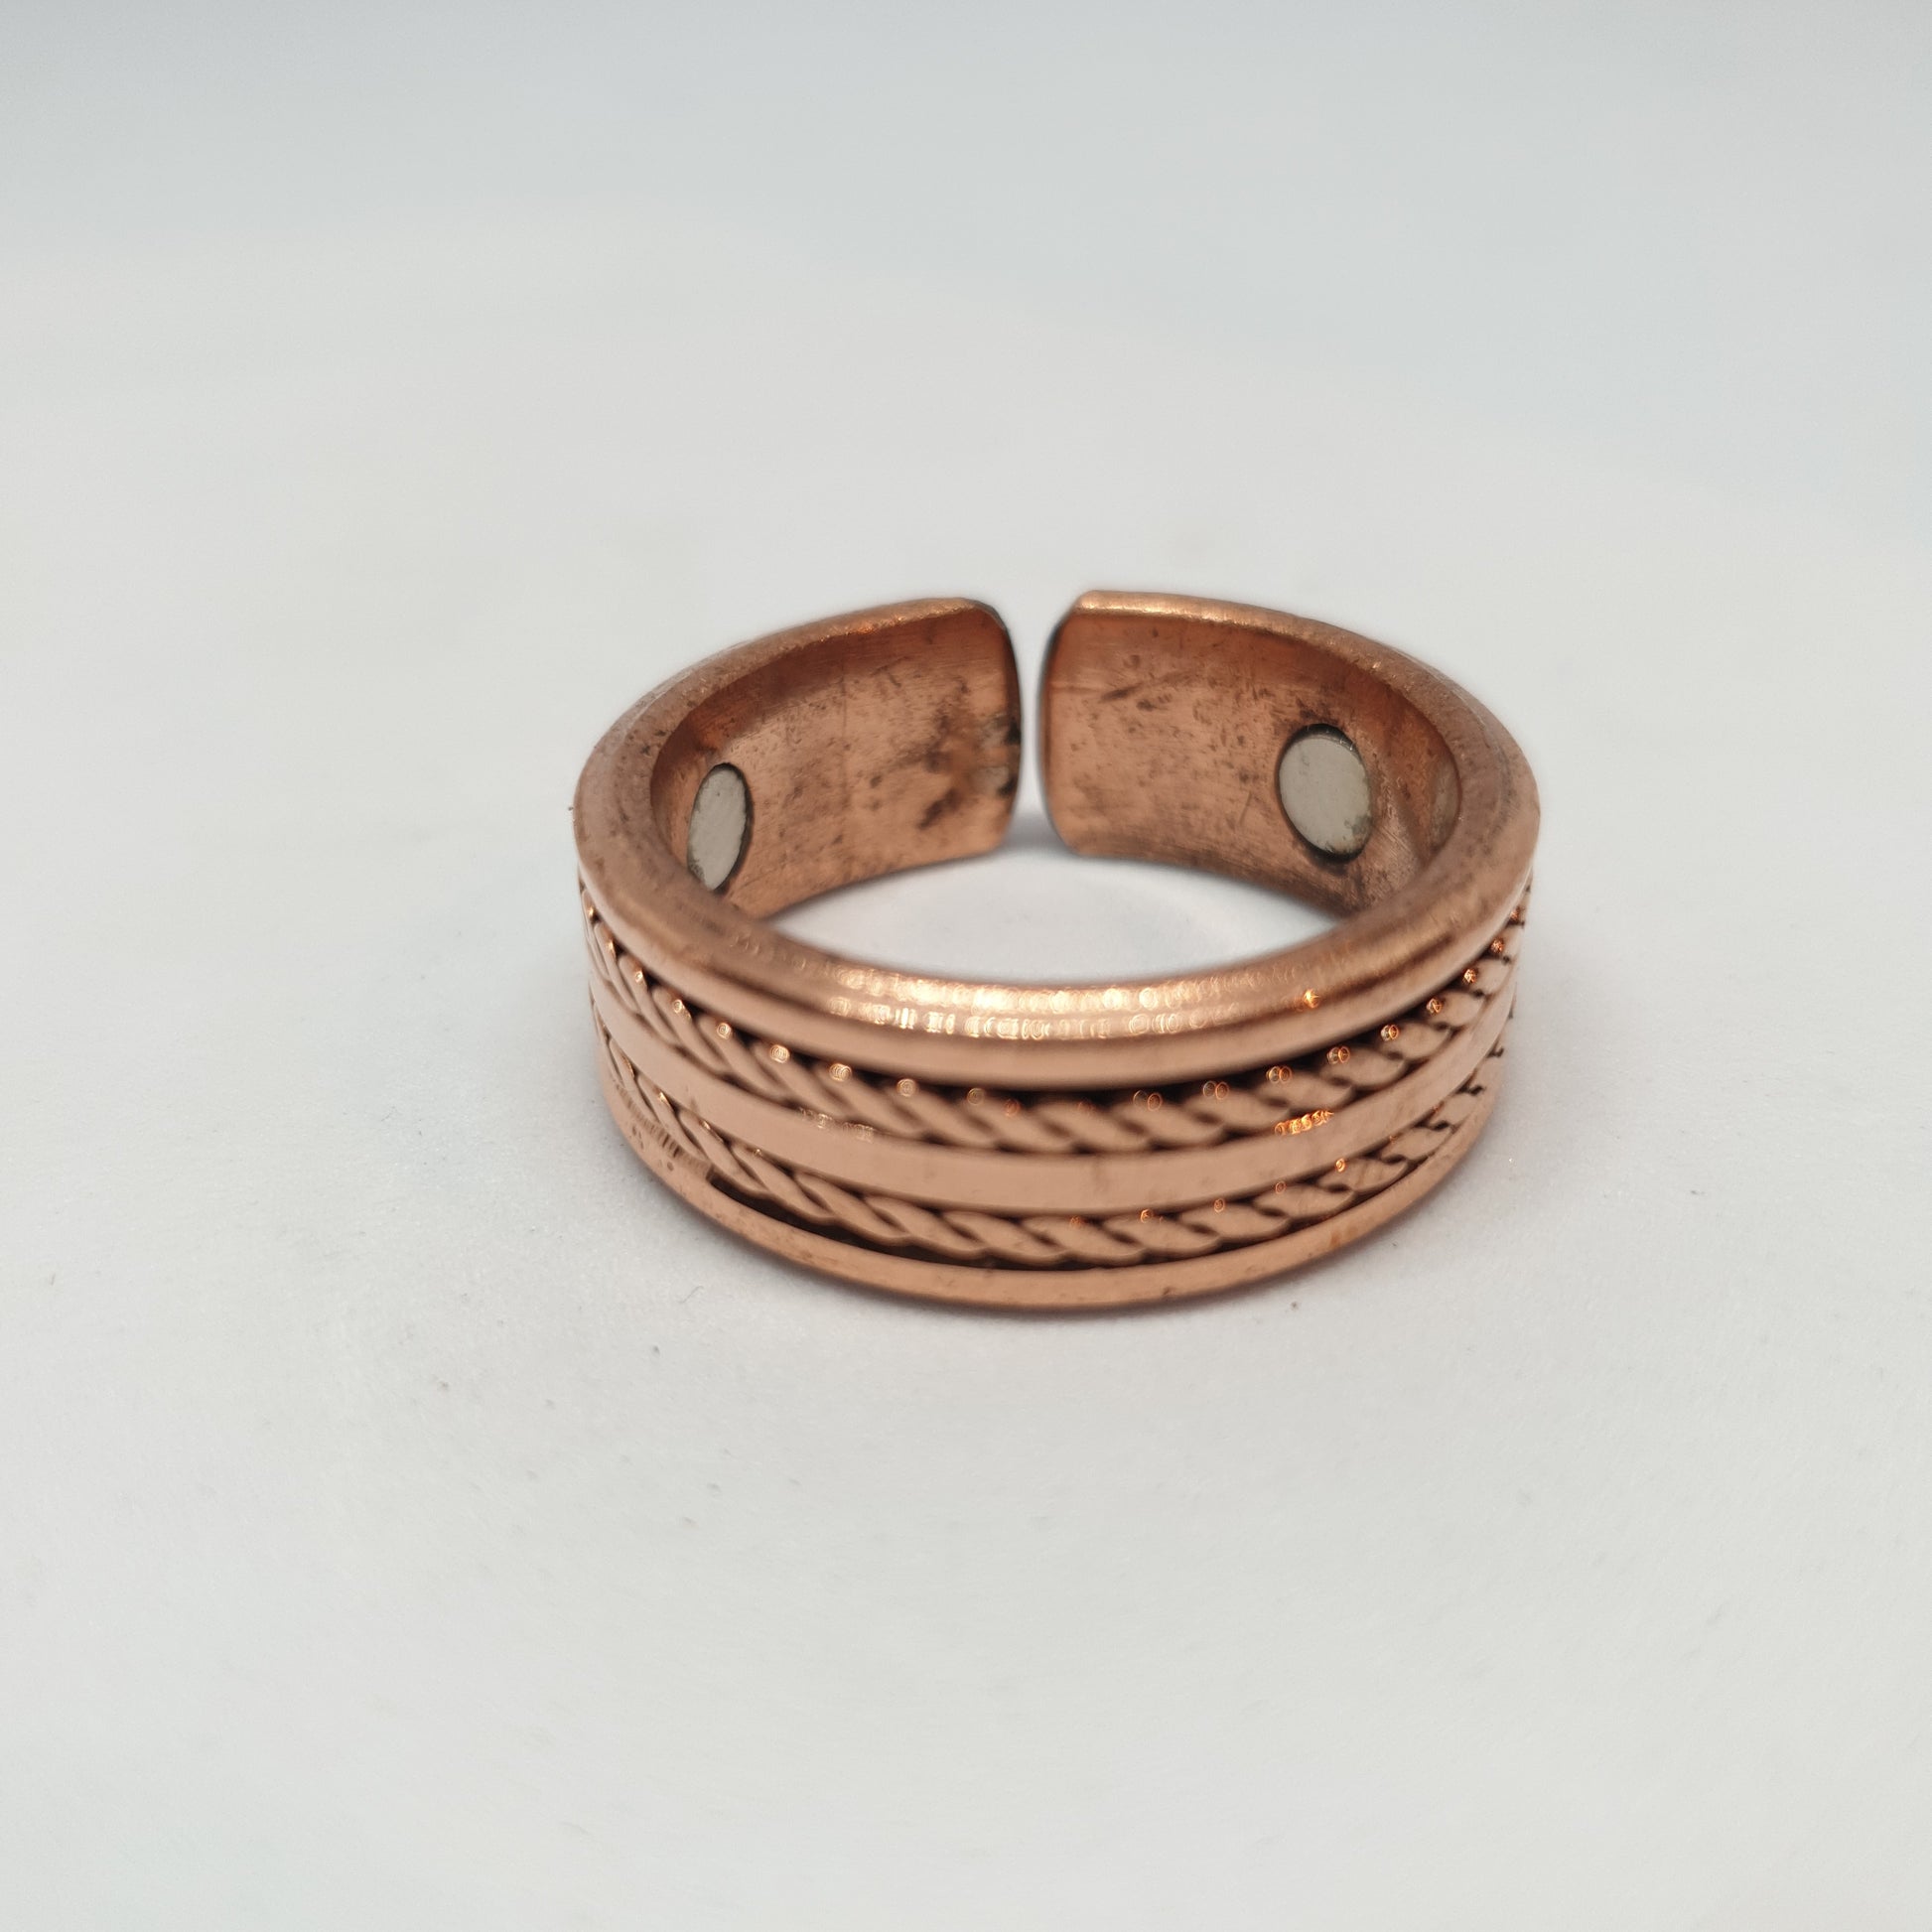 Doubl Twist Copper Magnetic Ring - Rivendell Shop